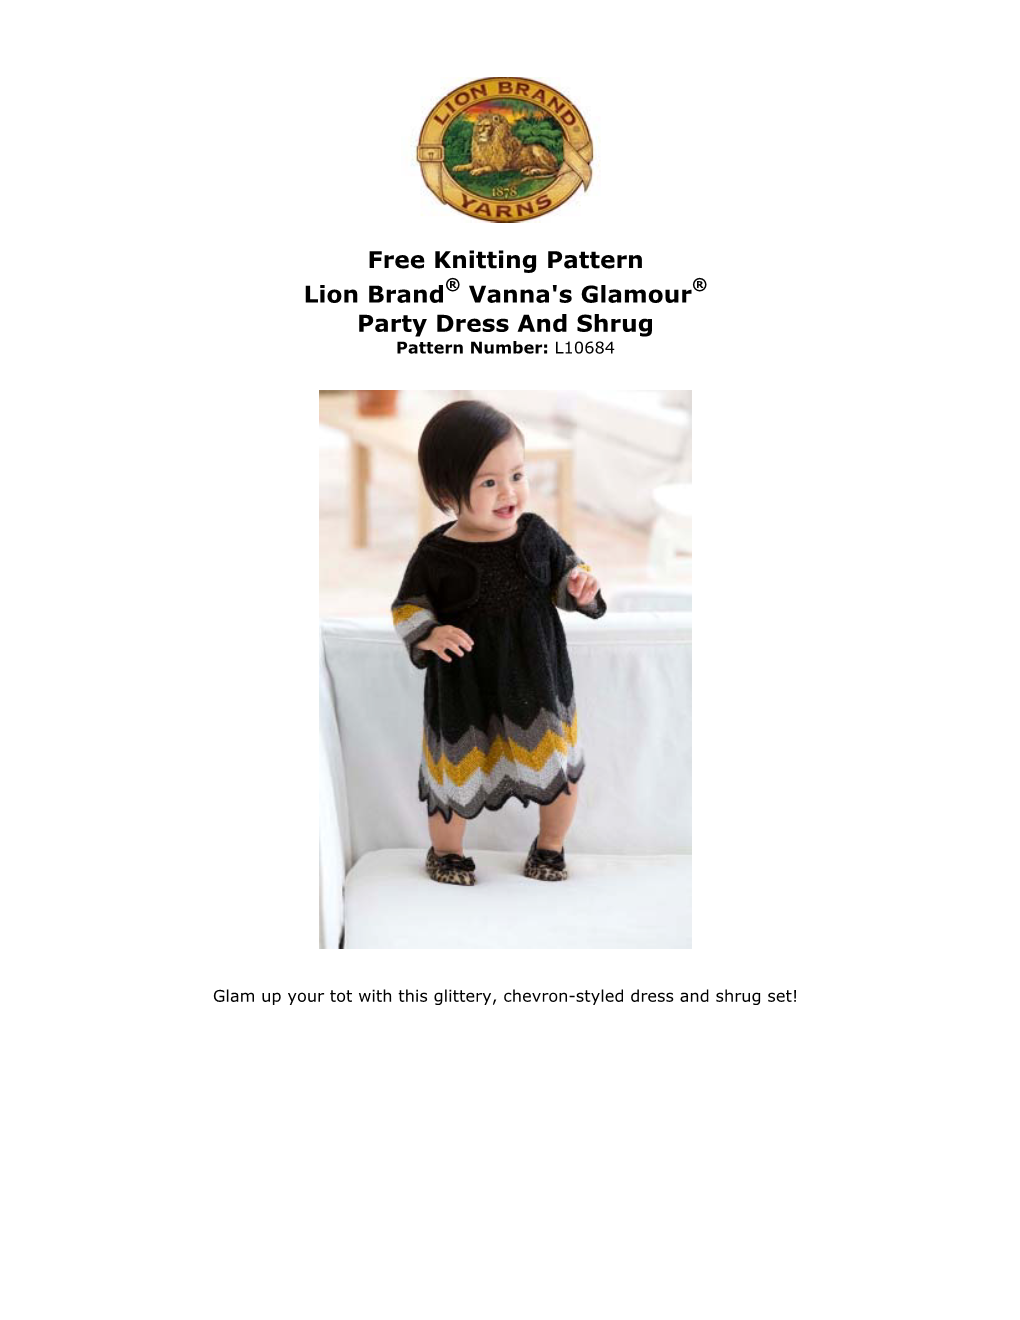 Free Knitting Pattern: Vanna's Glamour® Party Dress and Shrug